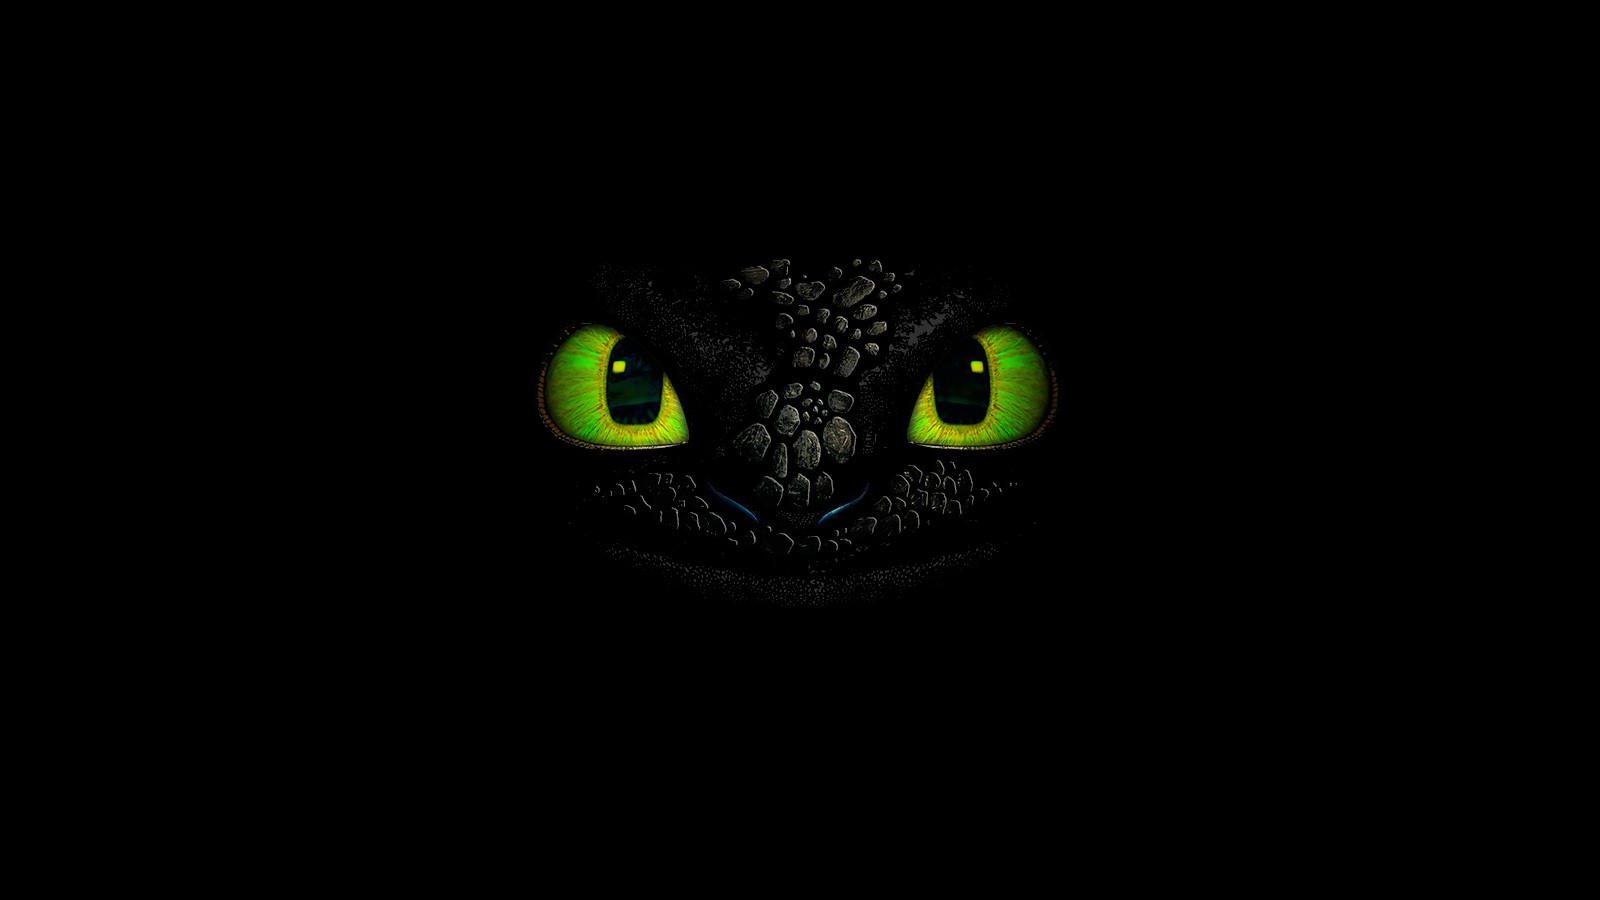 General 1600x900 How to Train Your Dragon black Toothless simple background dragon animated movies movies animal eyes minimalism creature green eyes